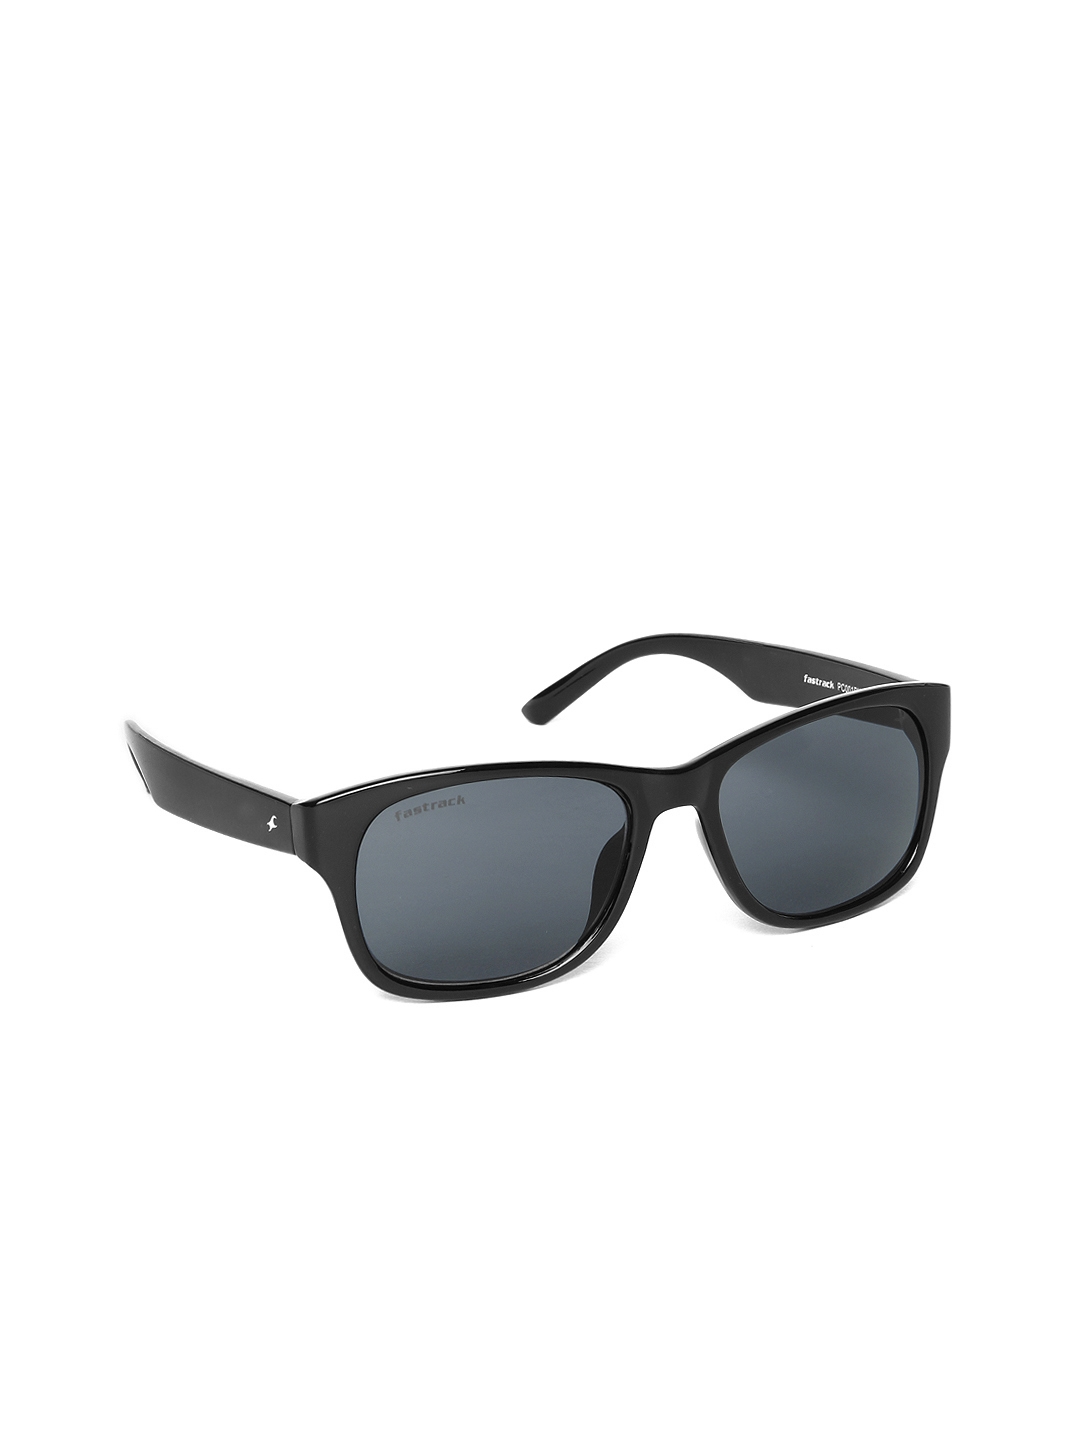 Fastrack NBP366GR2 Full Rim Oval Wayfarer Men Sunglass (Free Size, White)  in Godhra at best price by Star Opticals - Justdial